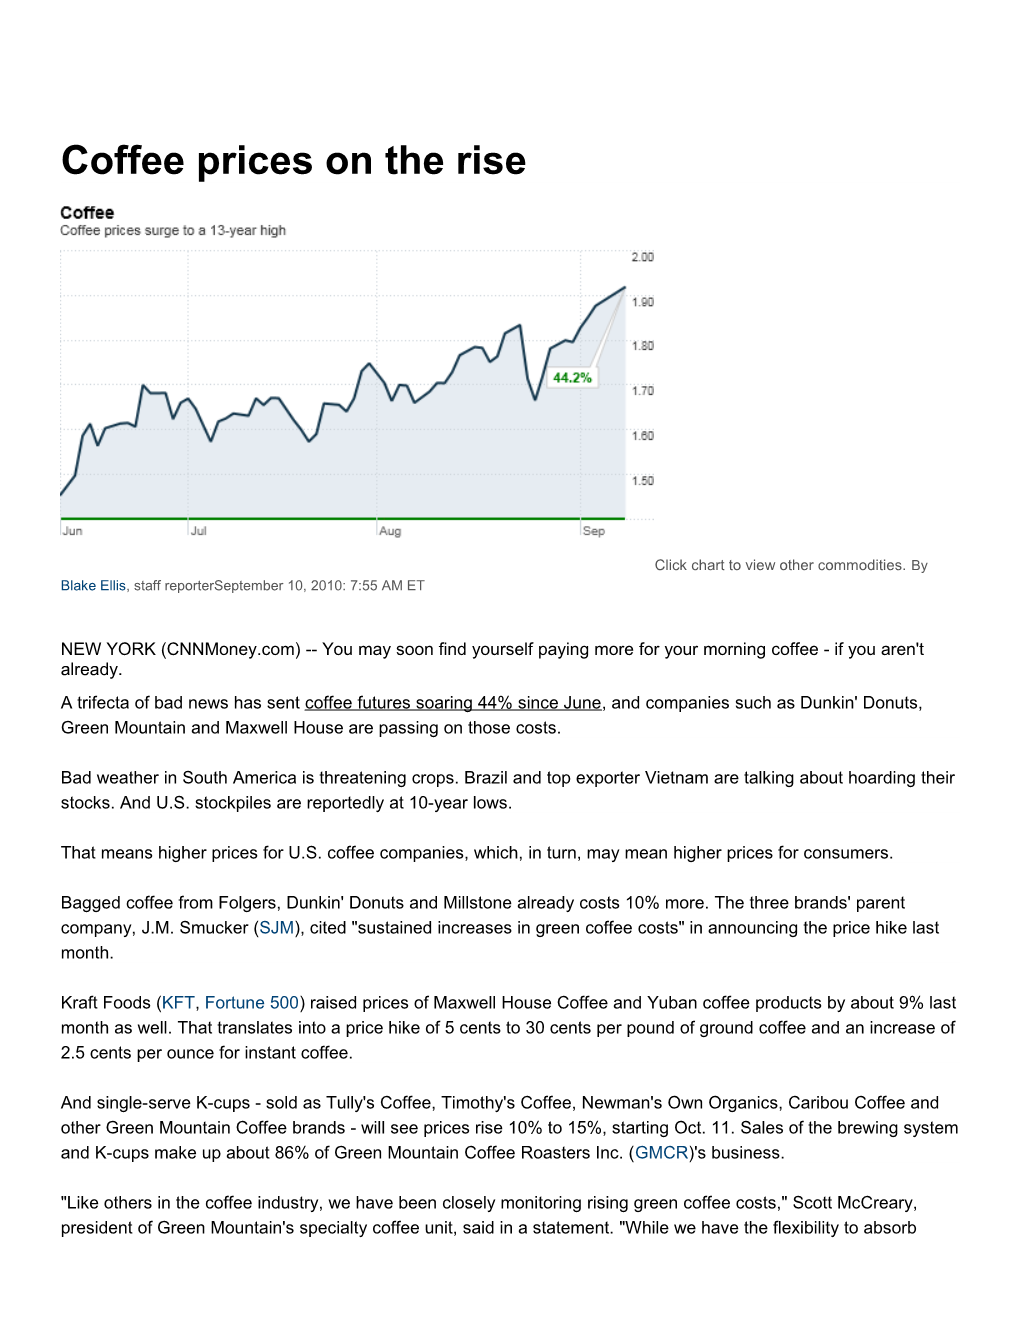 Coffee Prices on the Rise